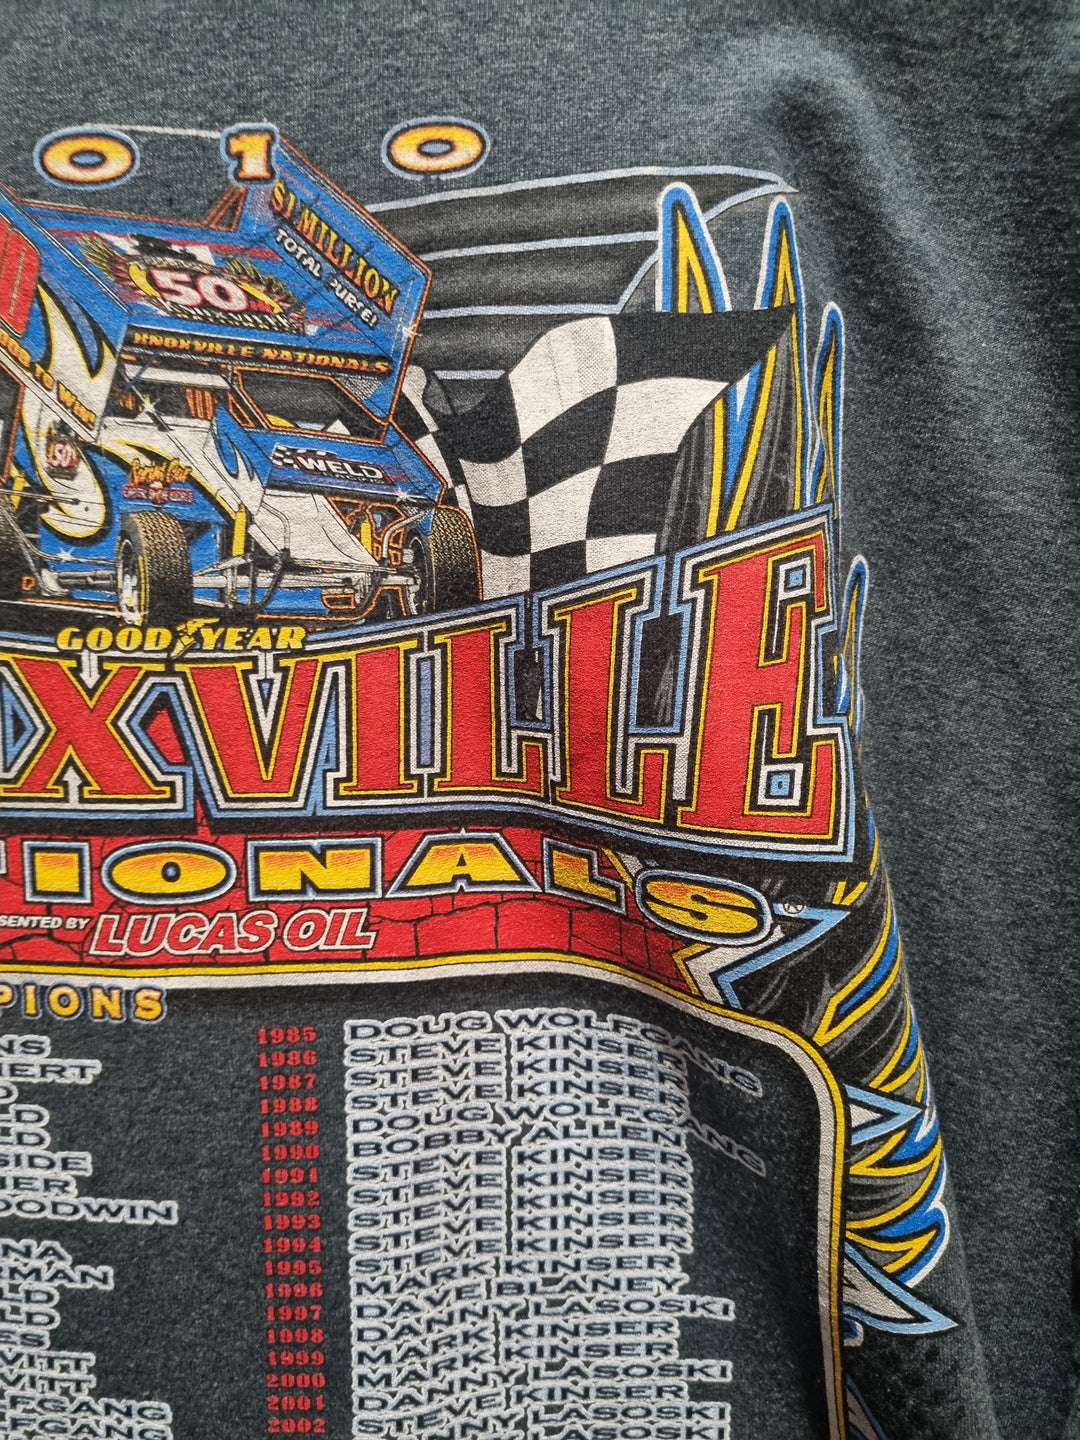 Knoxville Raceway 50th Anniversary 2XL